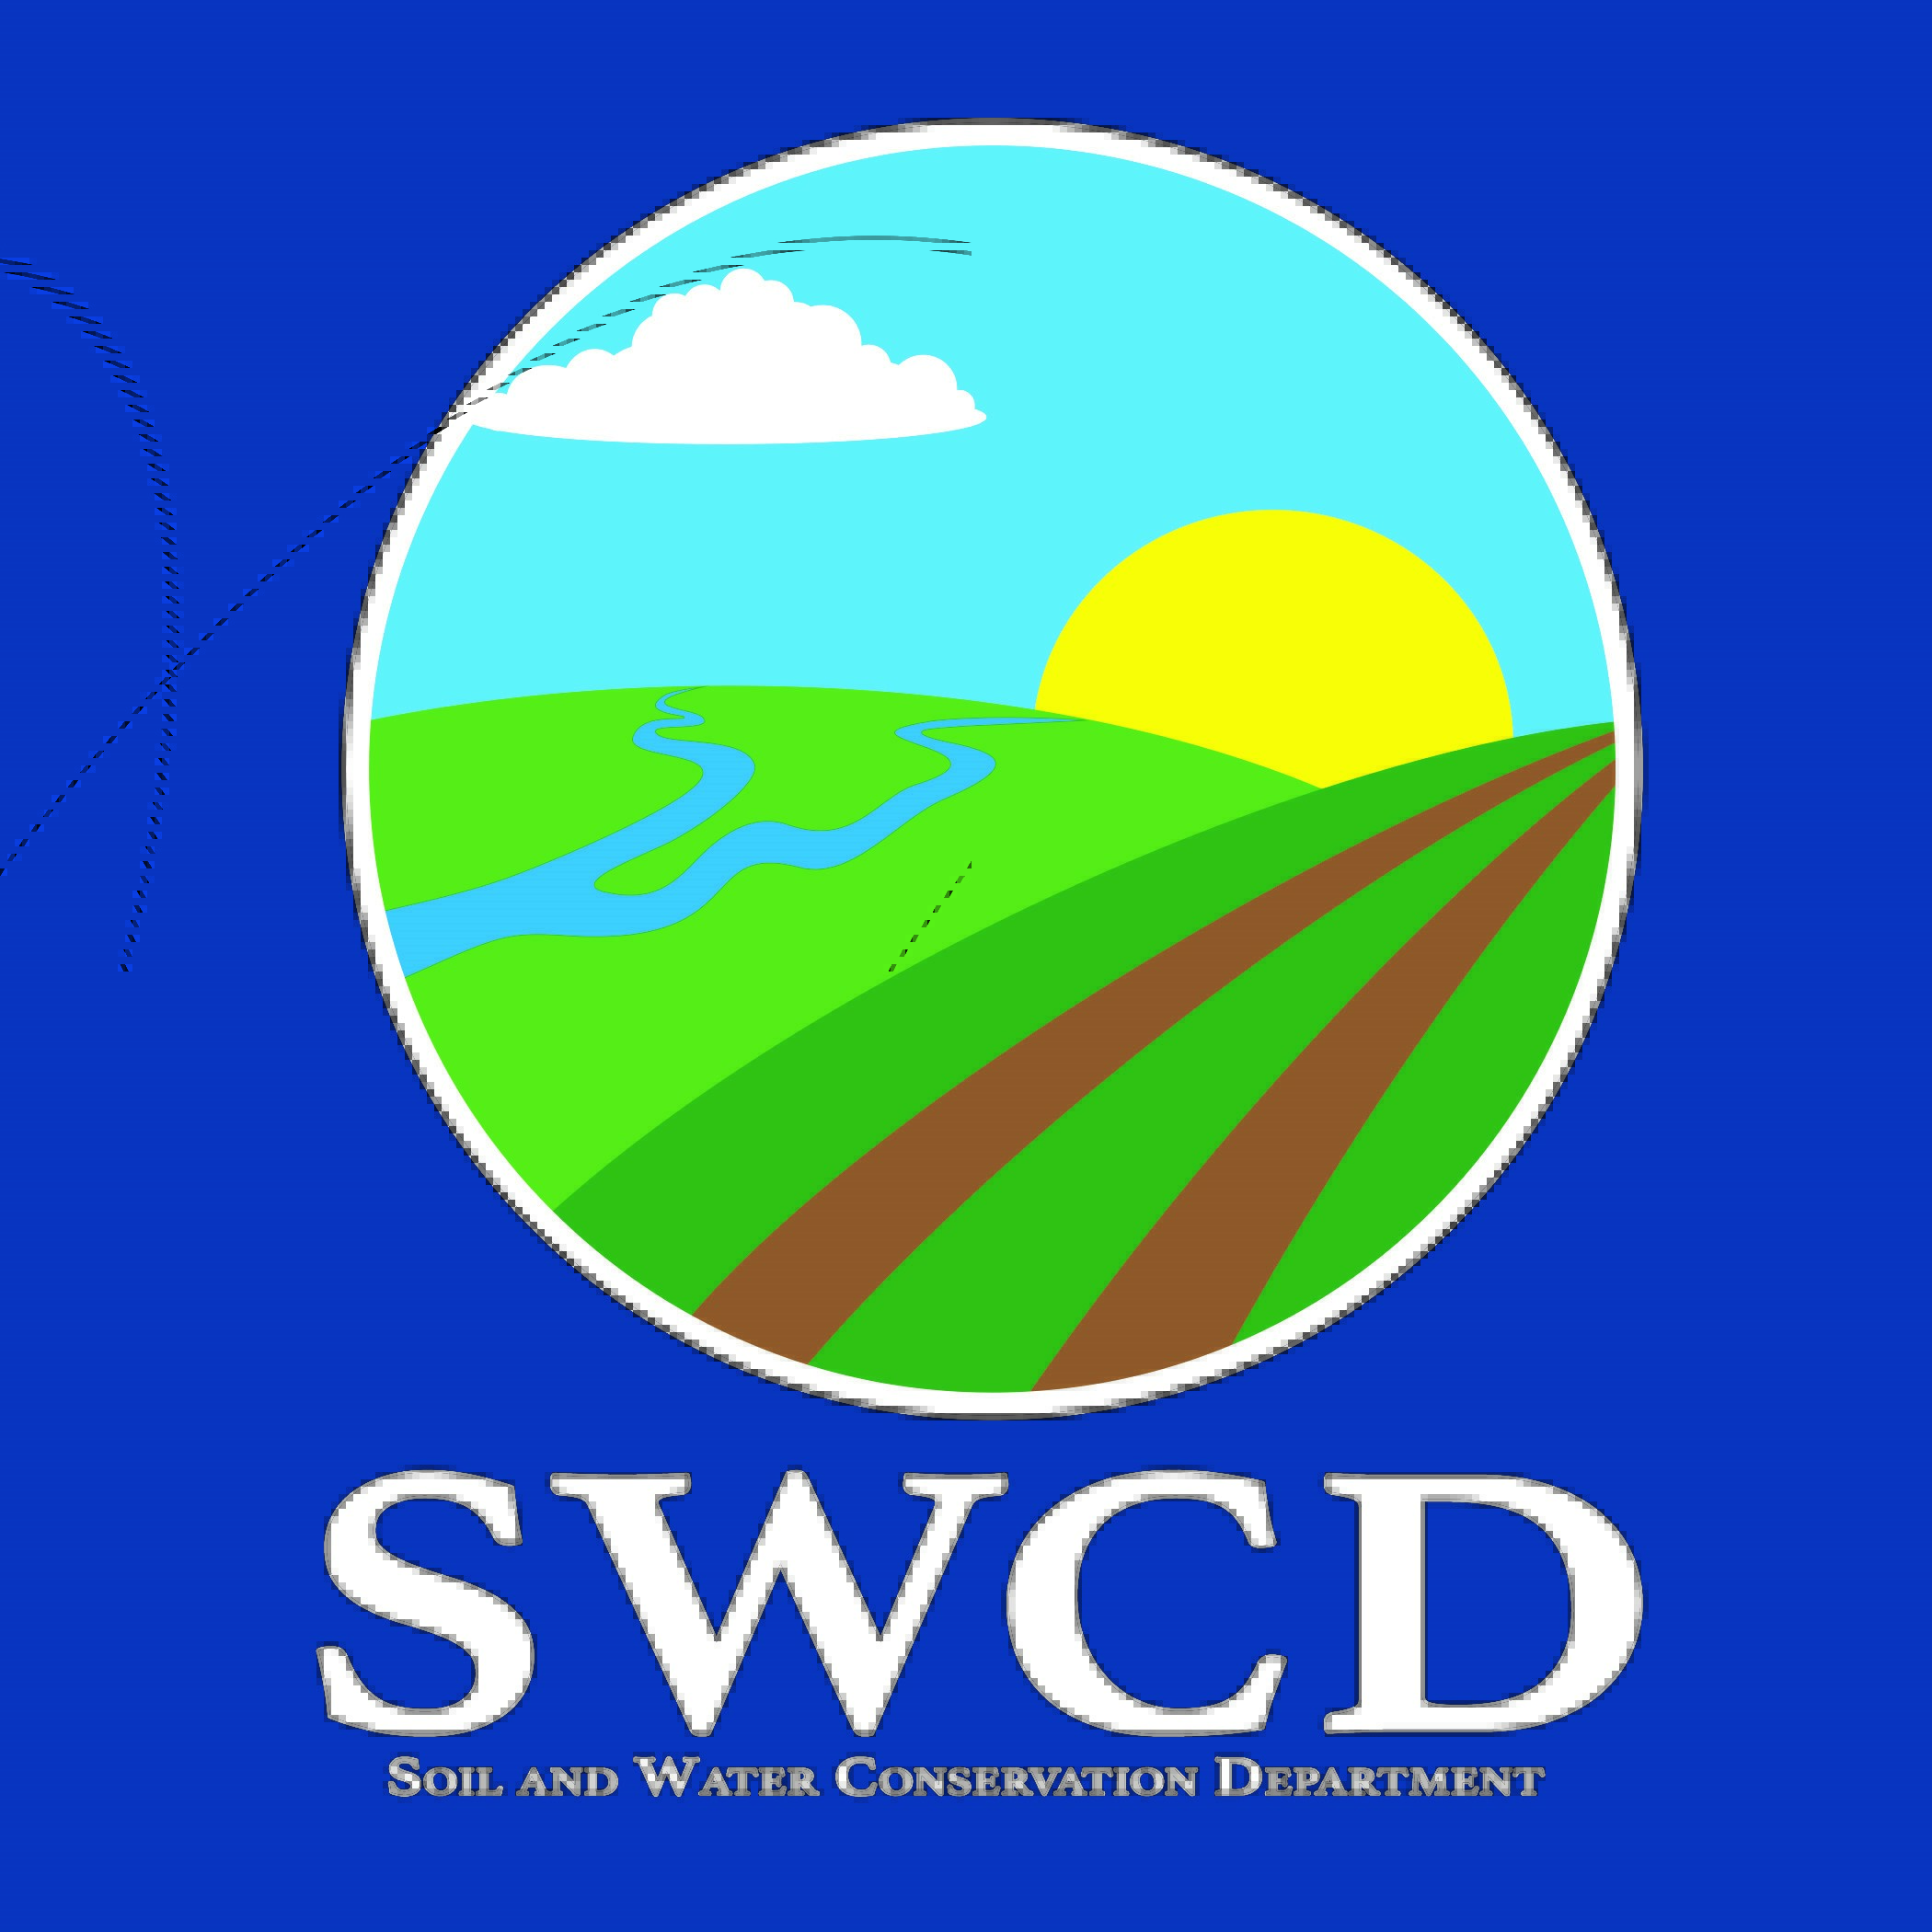 Soil and Water Conservation Department Logo